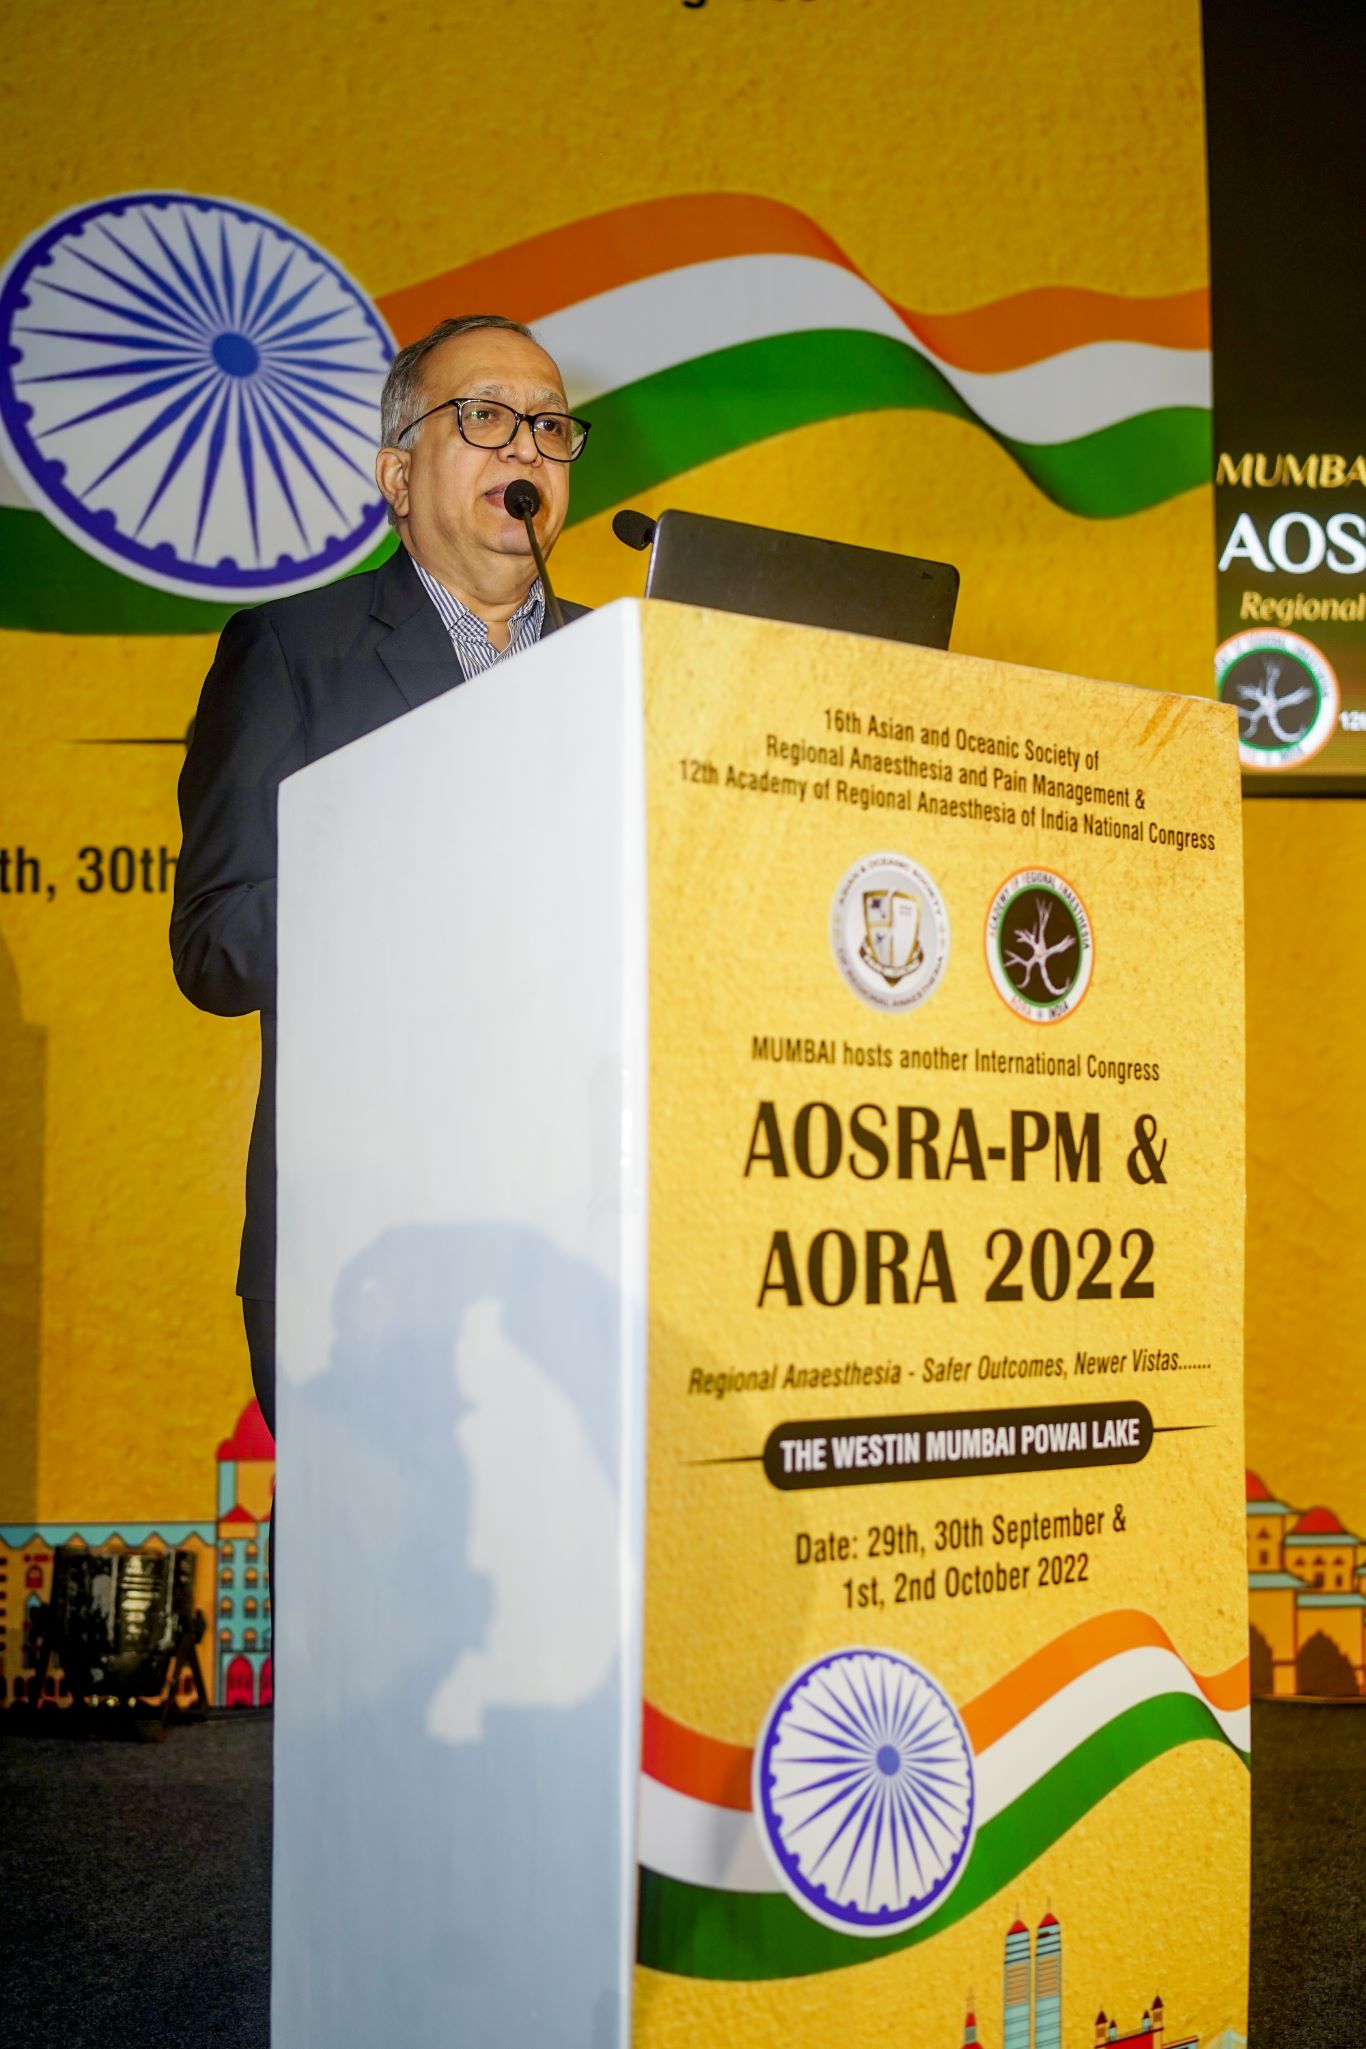 AORA INDIA - MORNING SESSION HALL A